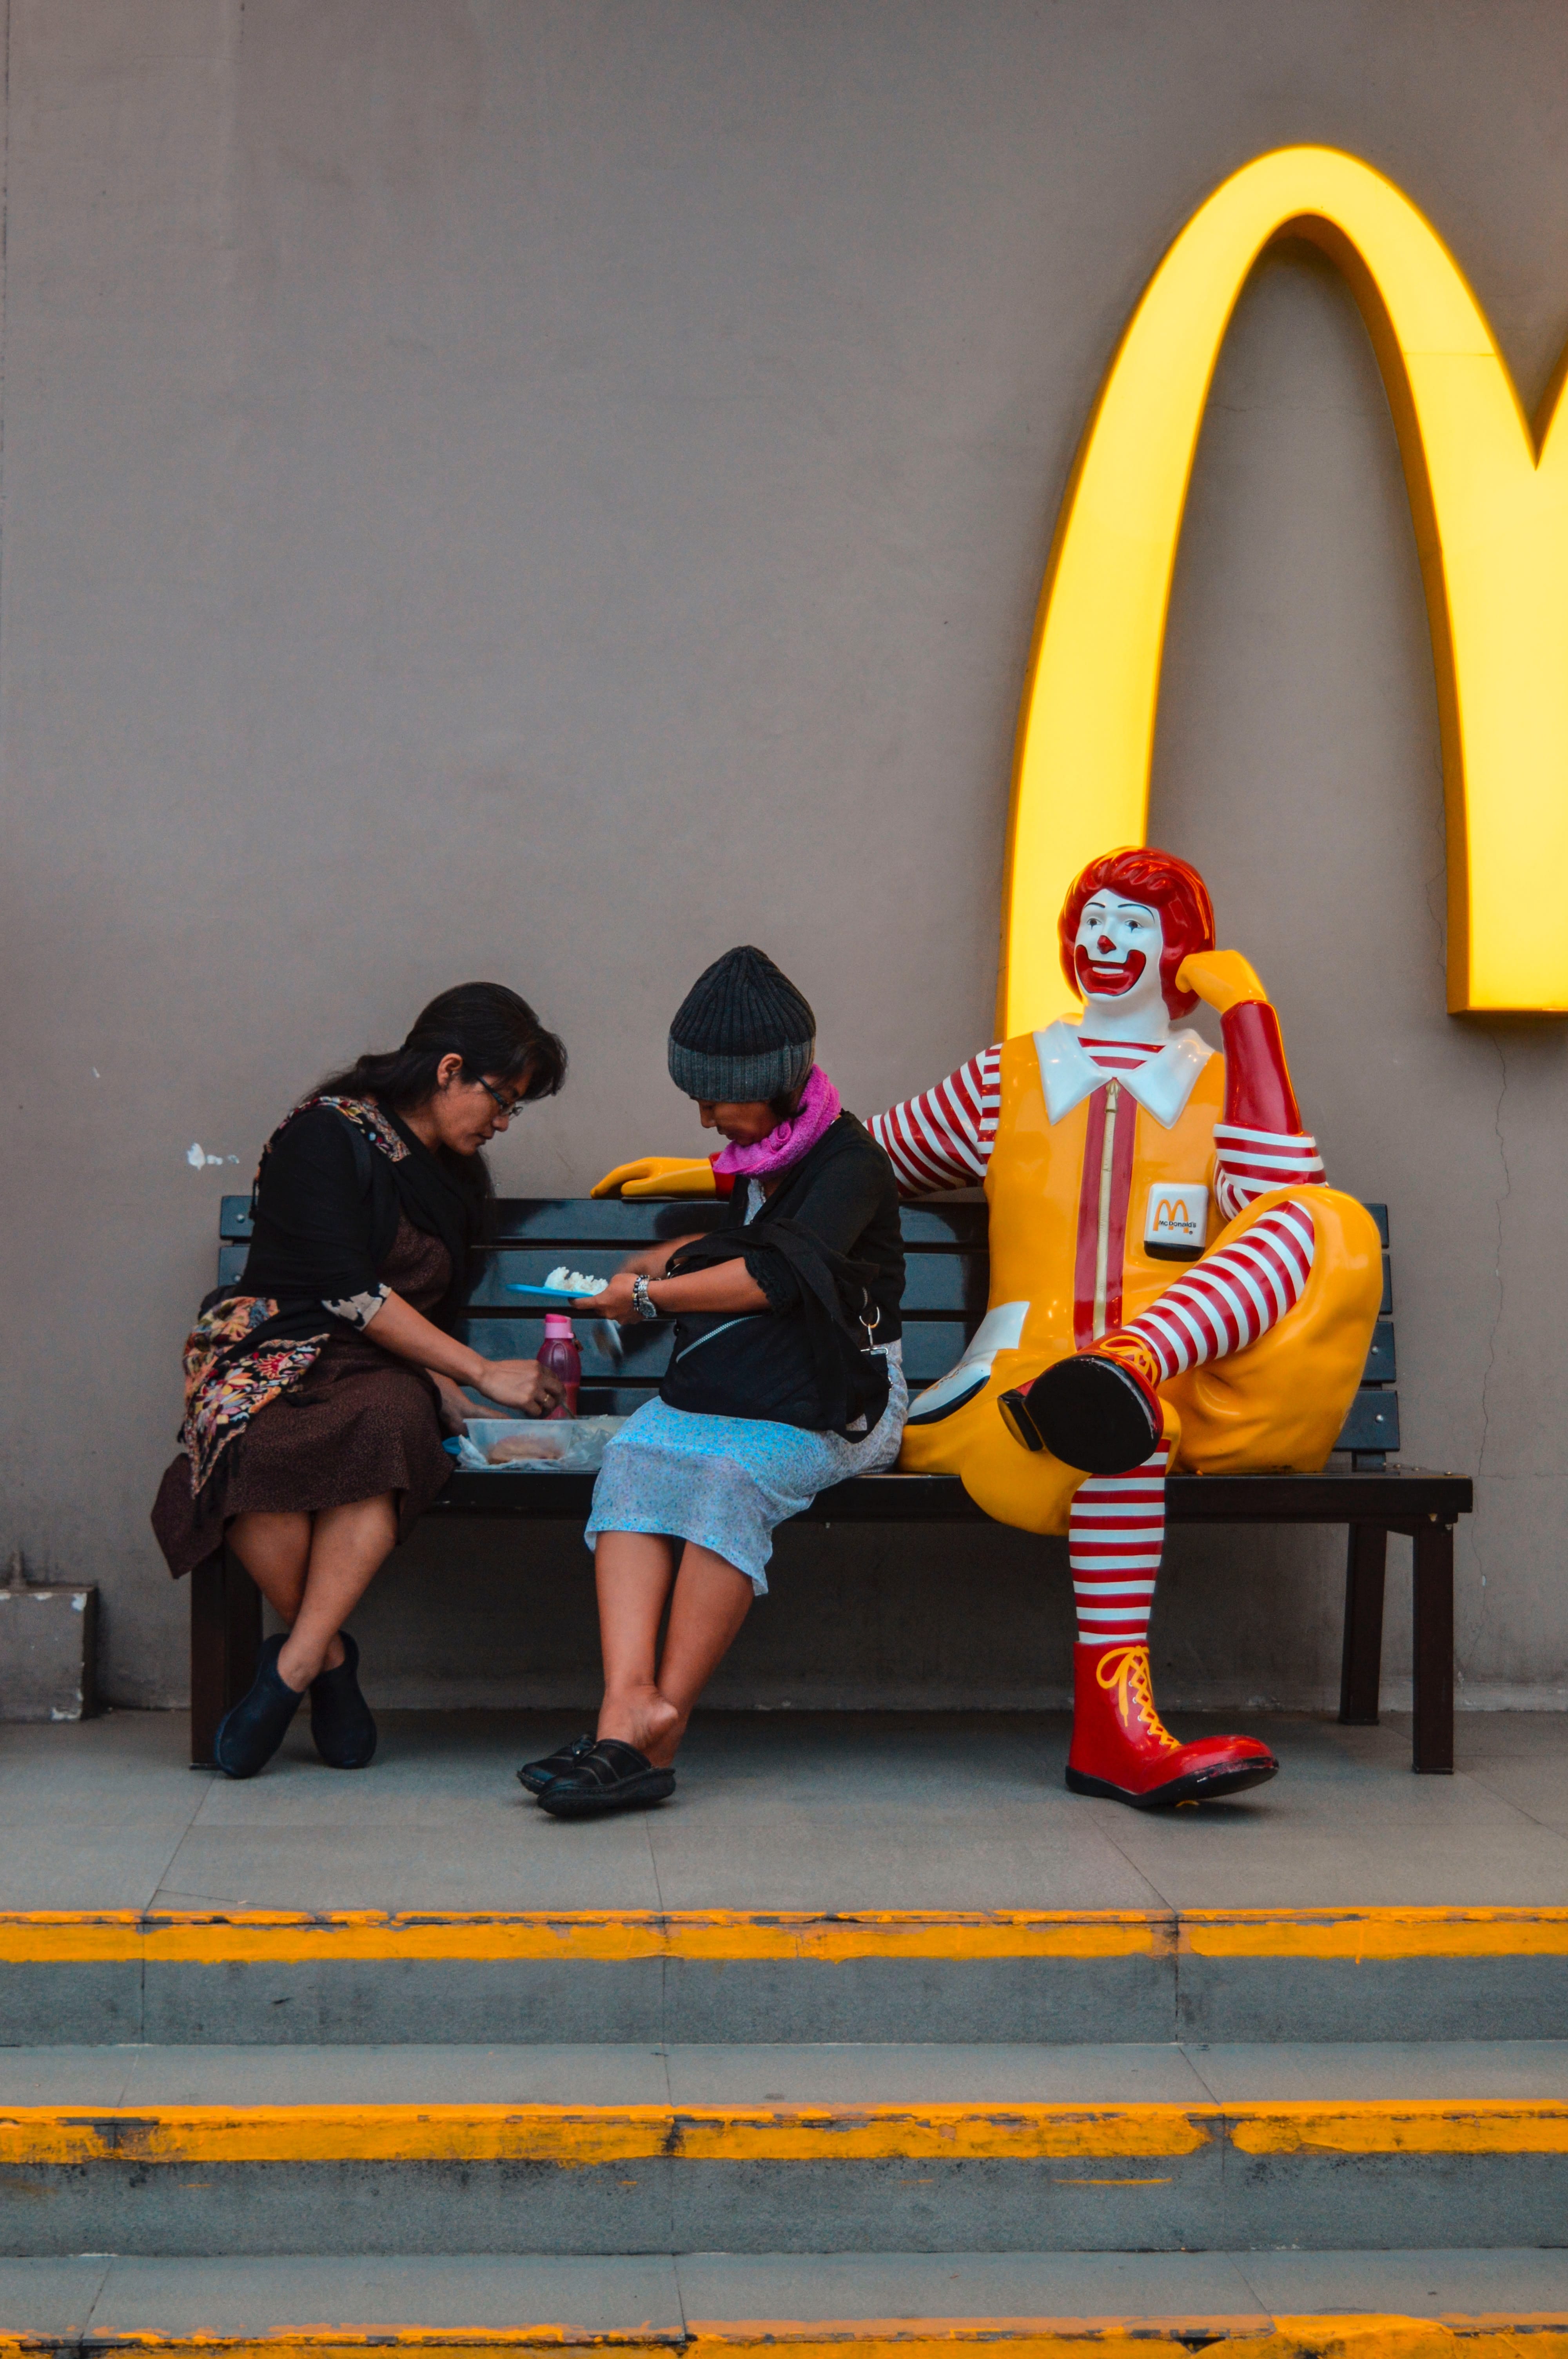 McDonald's has been a Crime Hotspot for Visitors, Employees Worldwide